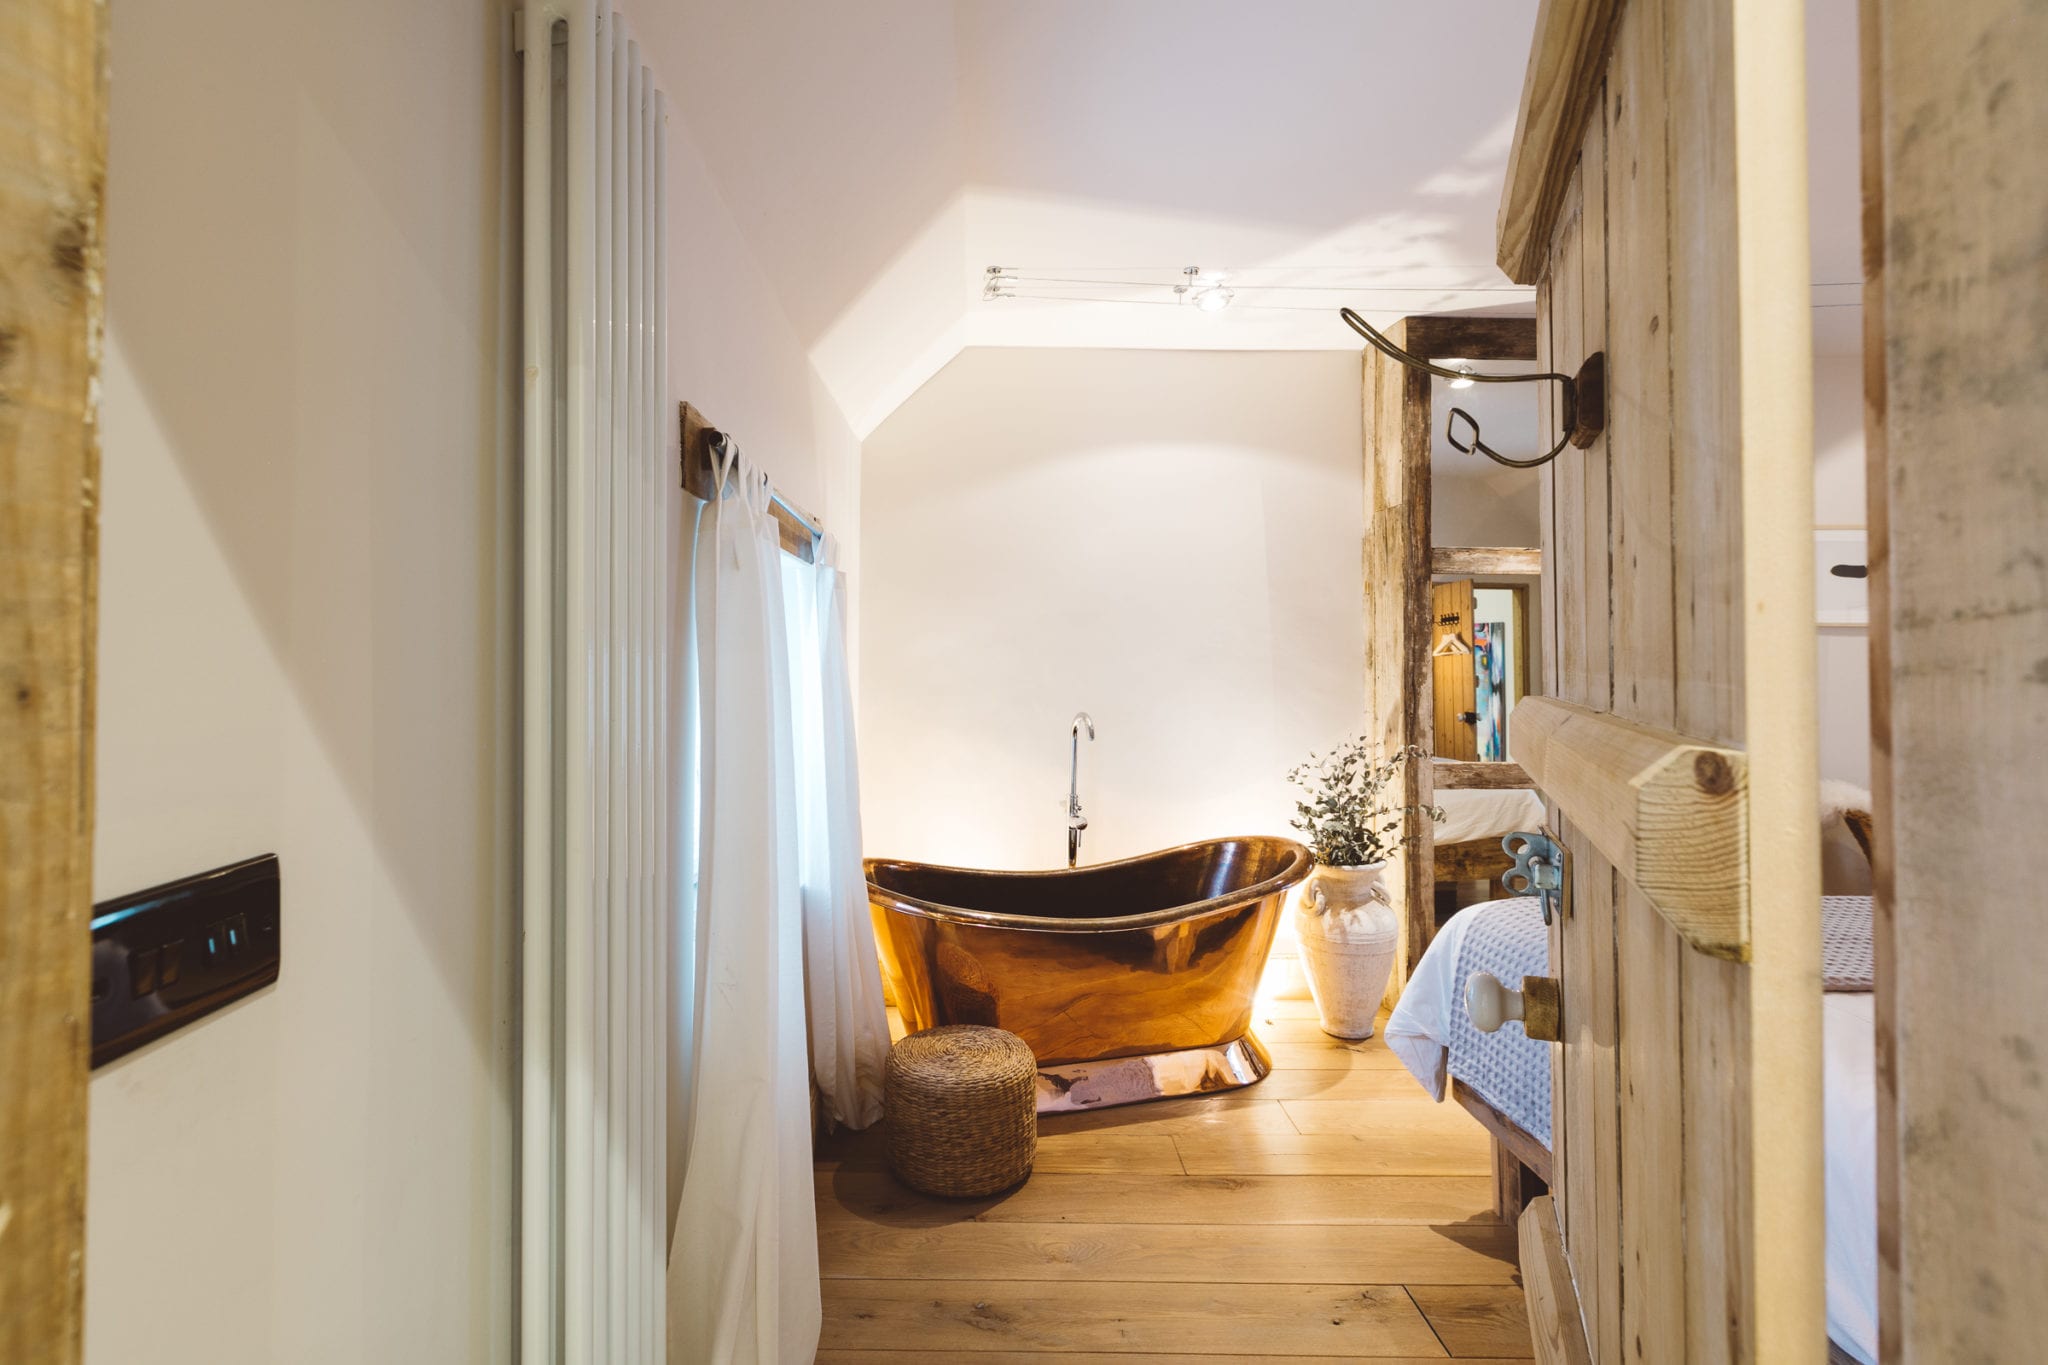 A large copper roll top bathtub in the corner of a bedroom